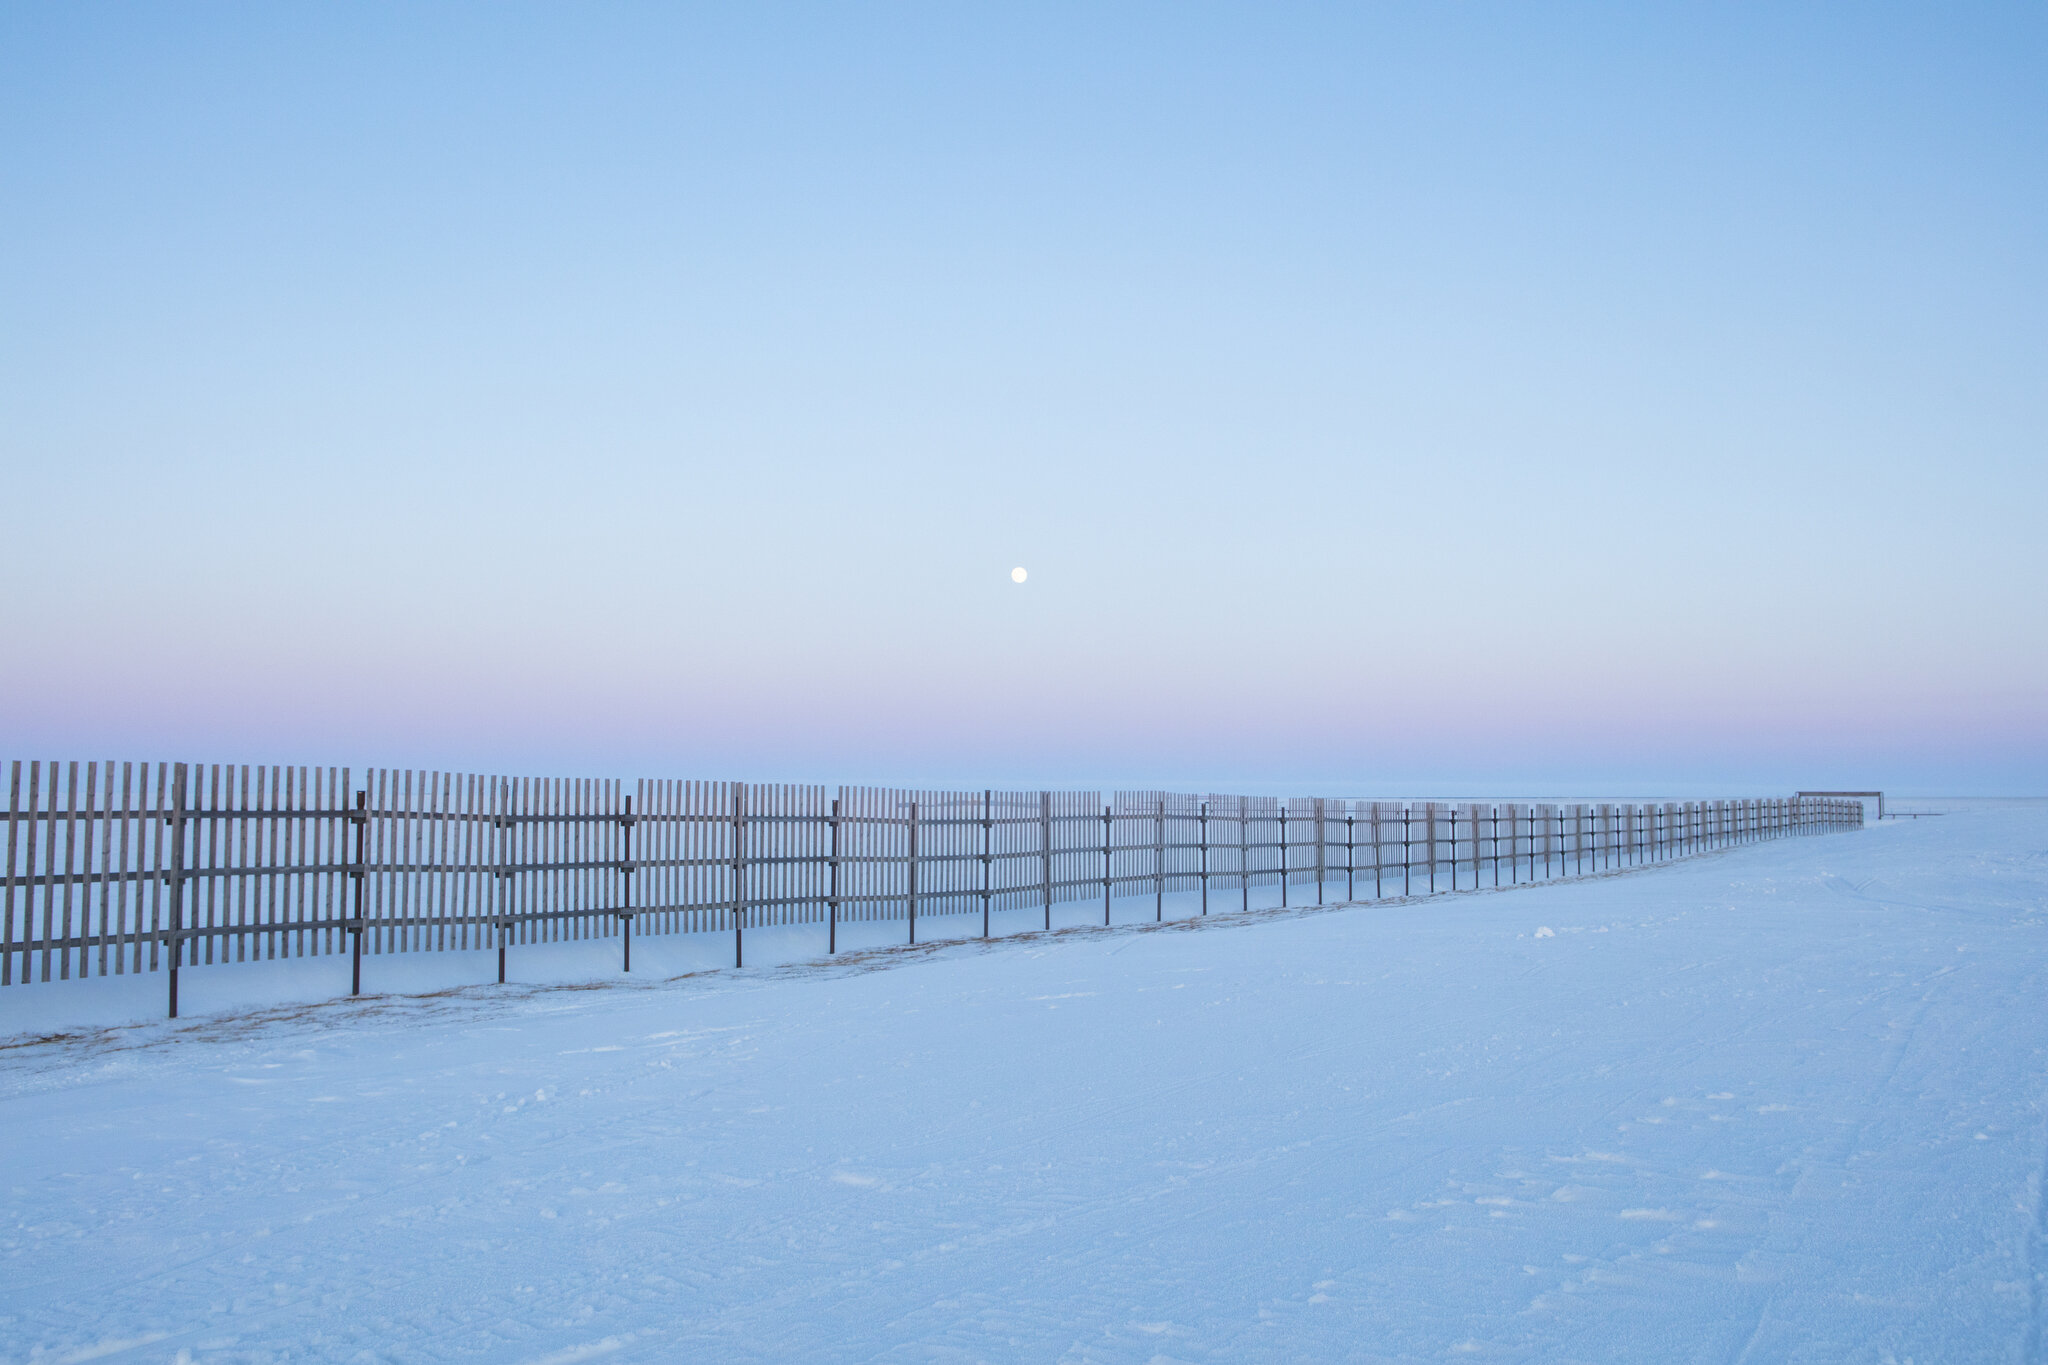  A snow fence in Utqiagvik, Alaska, is meant to provide protection from the threat of winter storms that can engulf the entire village in snow drifts. April 29th, 2018 Extreme weather events are becoming increasingly common, as warming weather and me